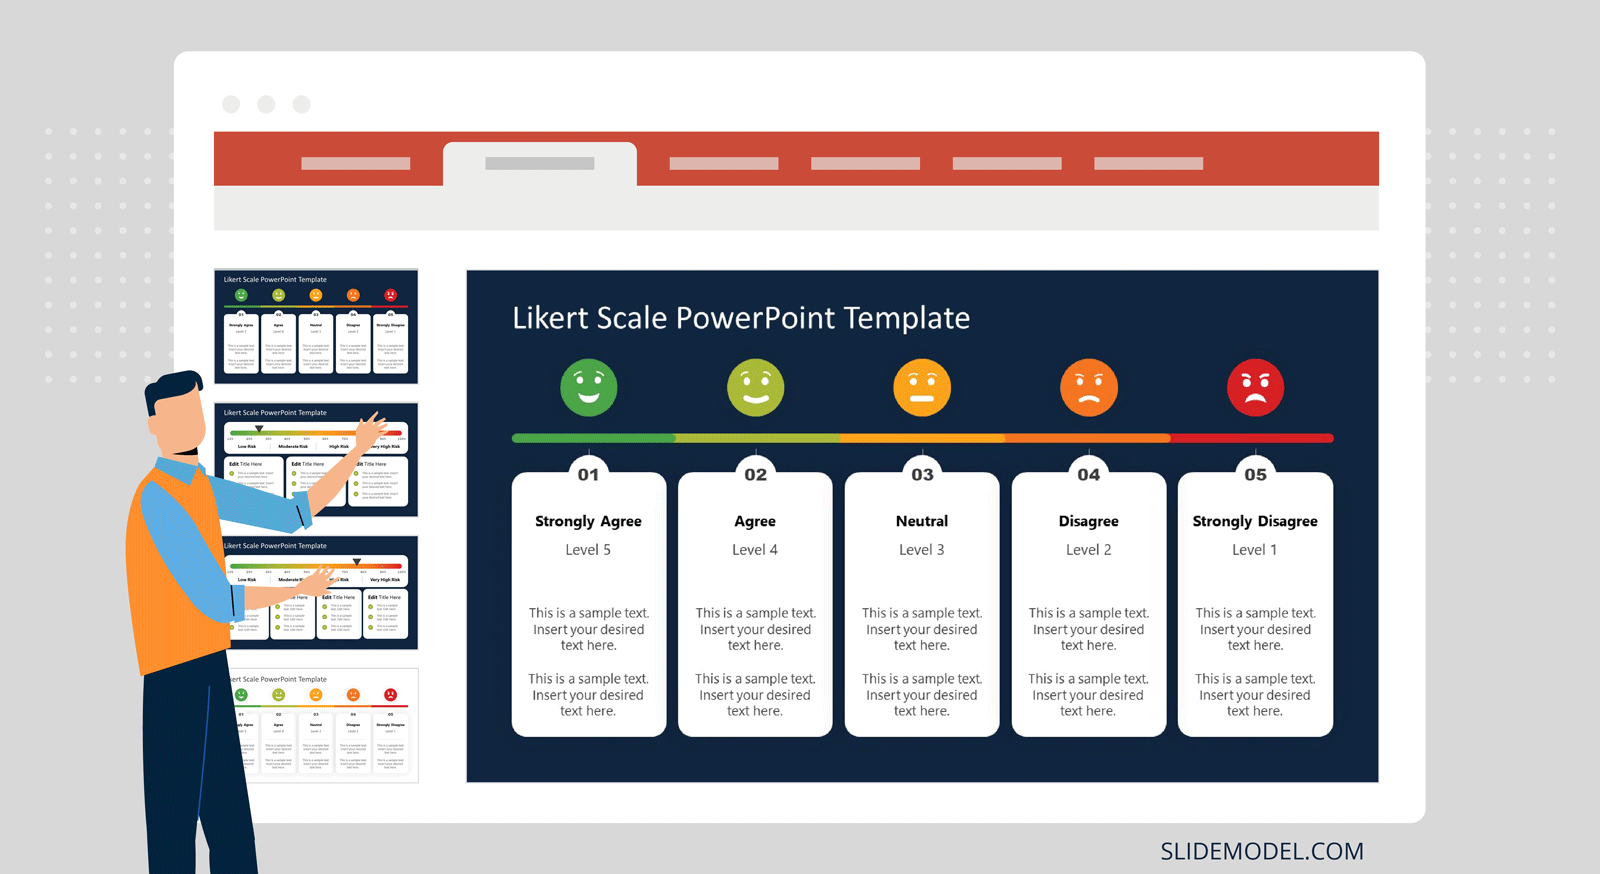 Questionnaires Slide Example with Likert Scale